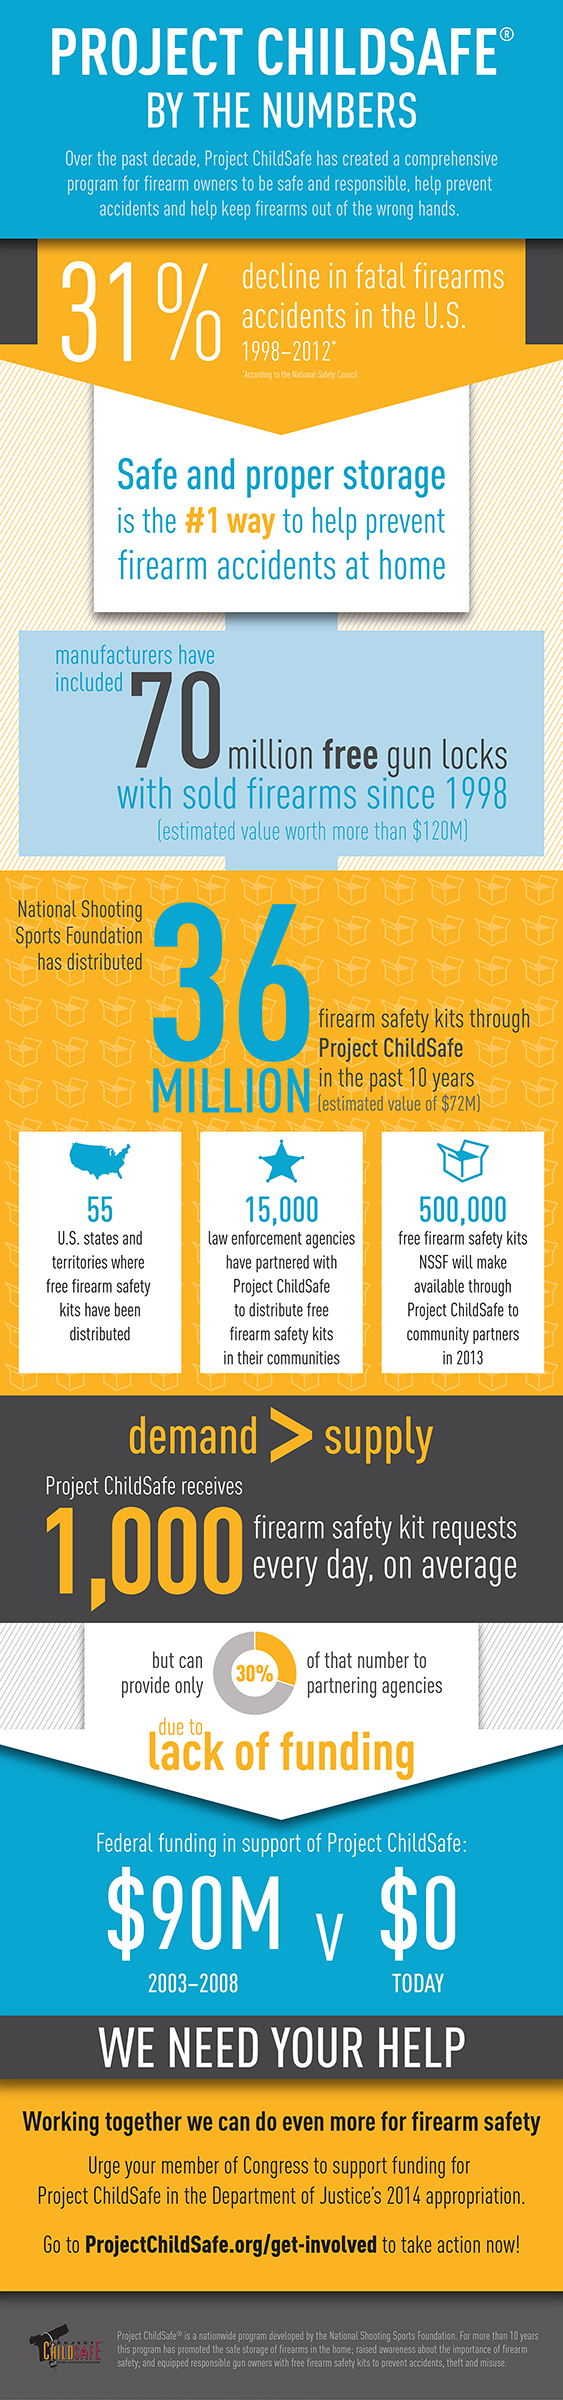 NSSF_PCS_Infographic_PCSByTheNumbers_Updated092014_v01